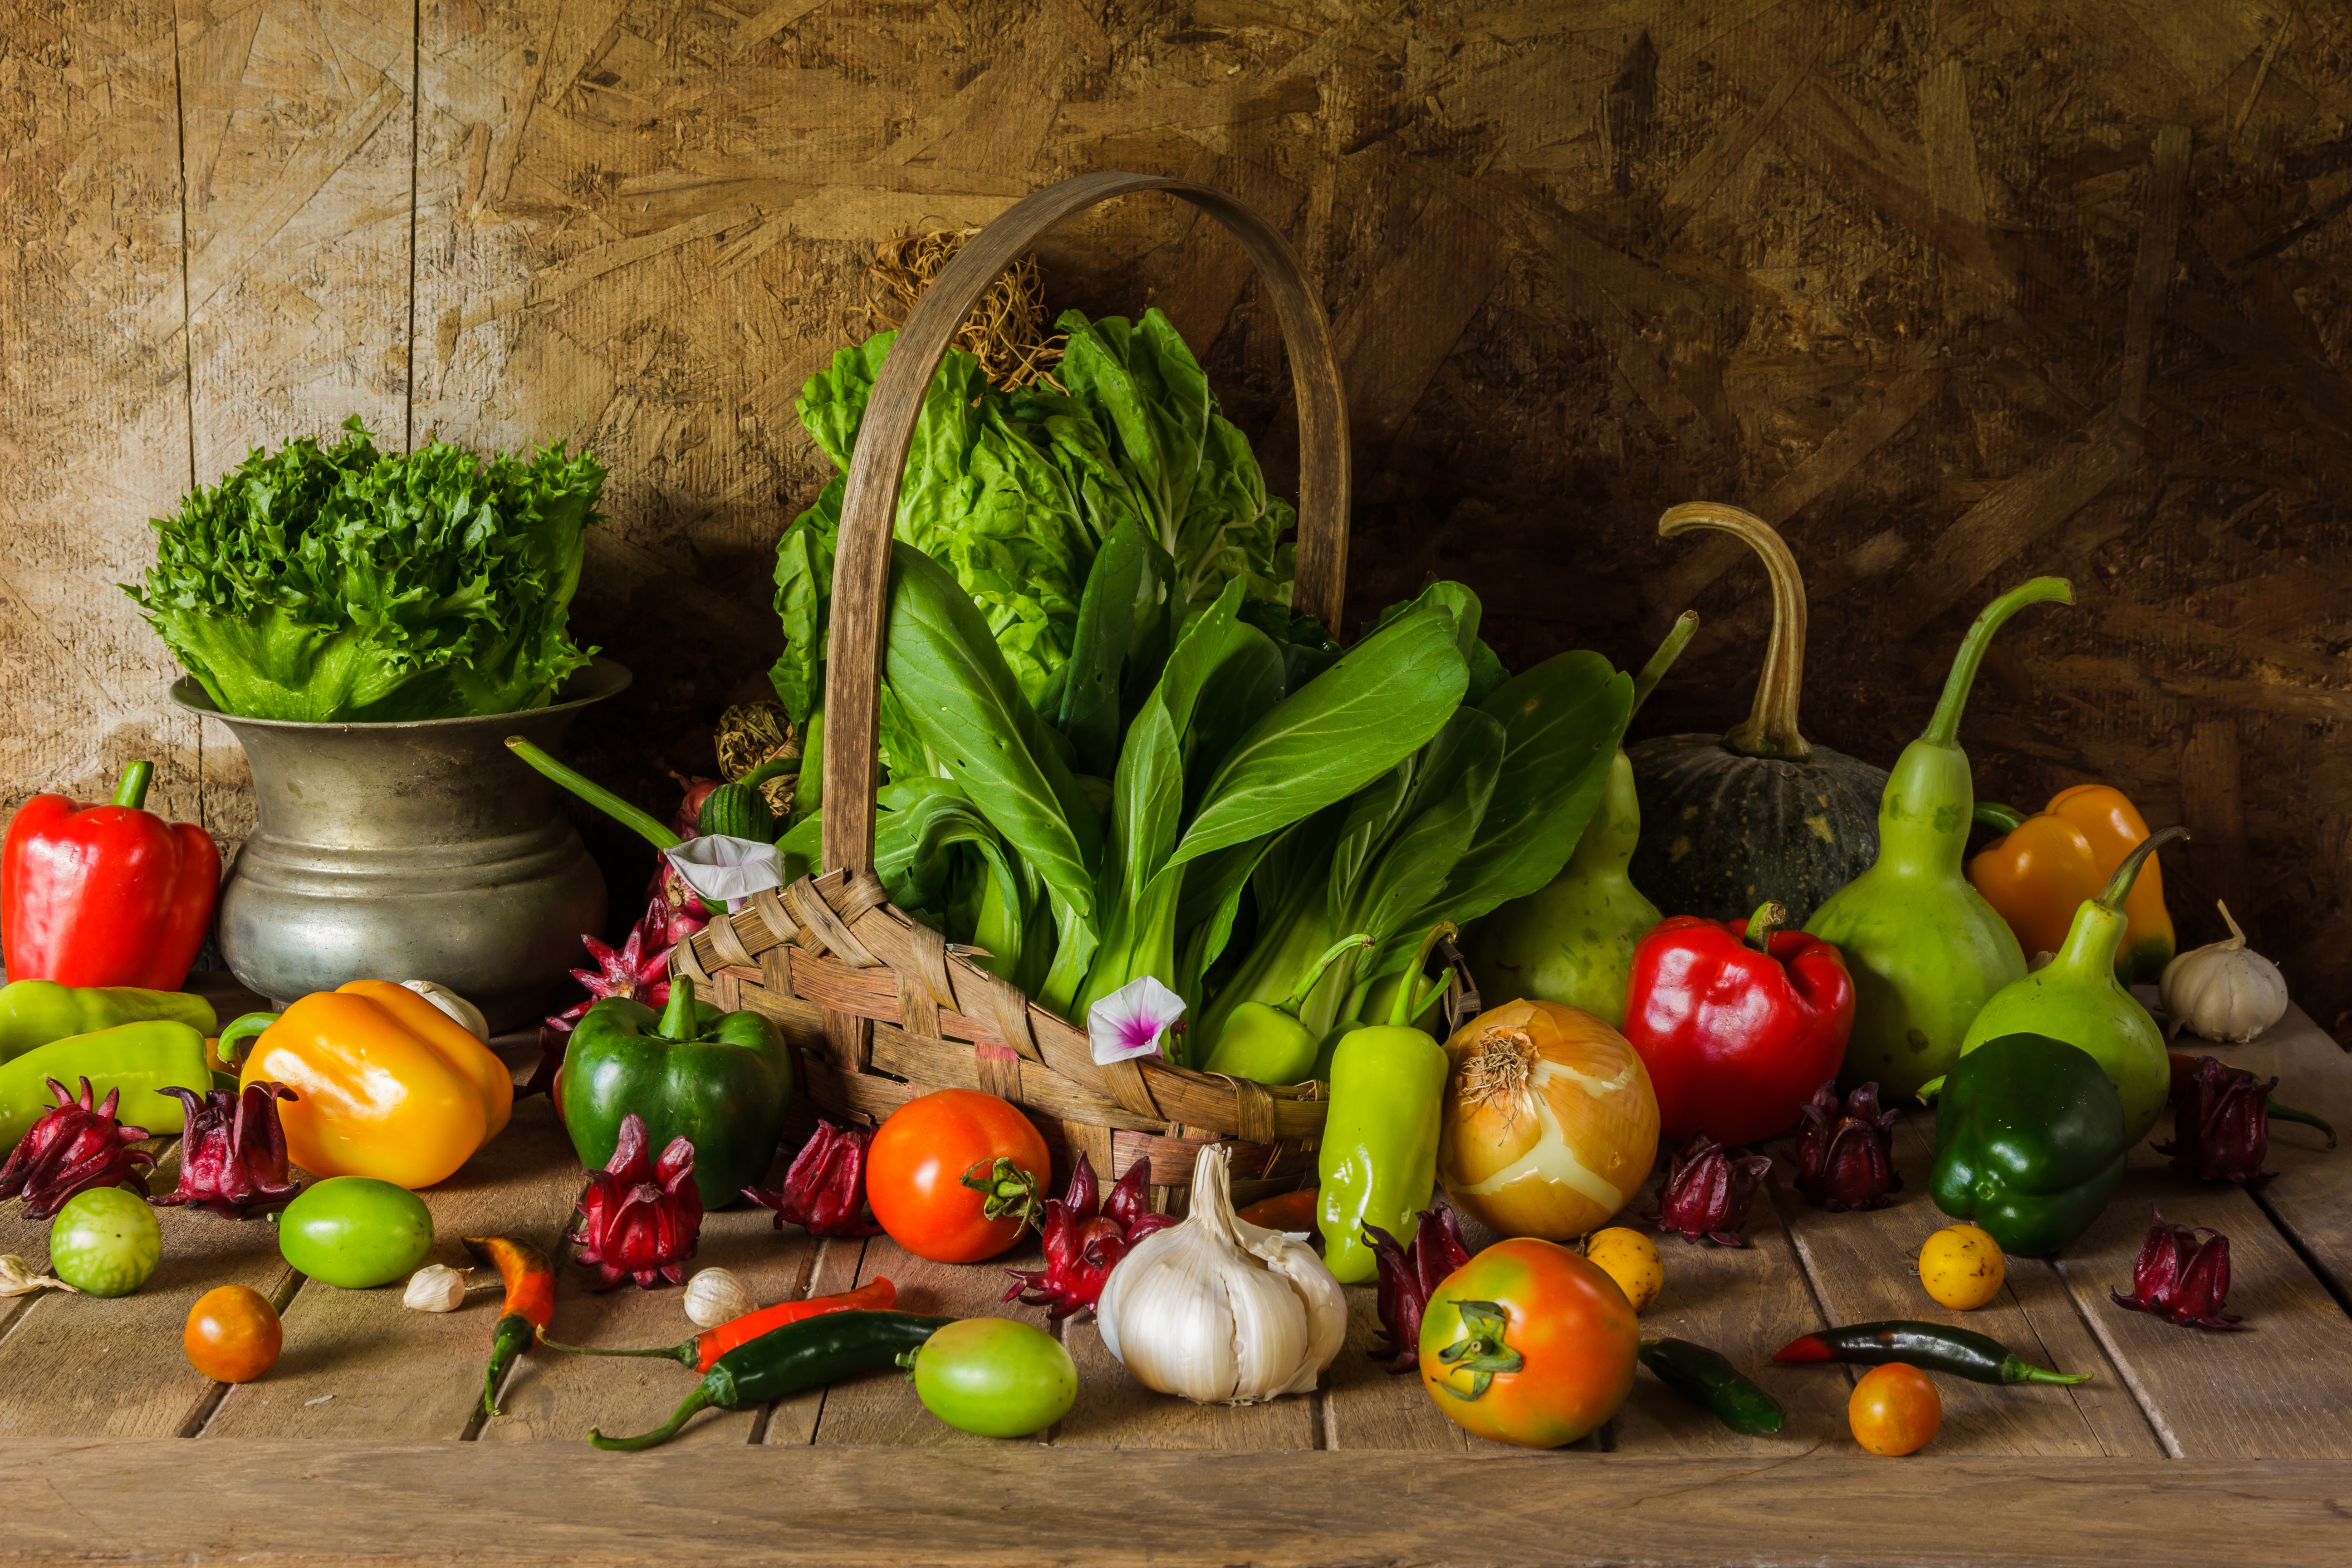 Food Vegetables Still Life Tomatoes Garlic Pepper Baskets Lettuce Bell Peppers Chilli Peppers Wooden 5184x3456